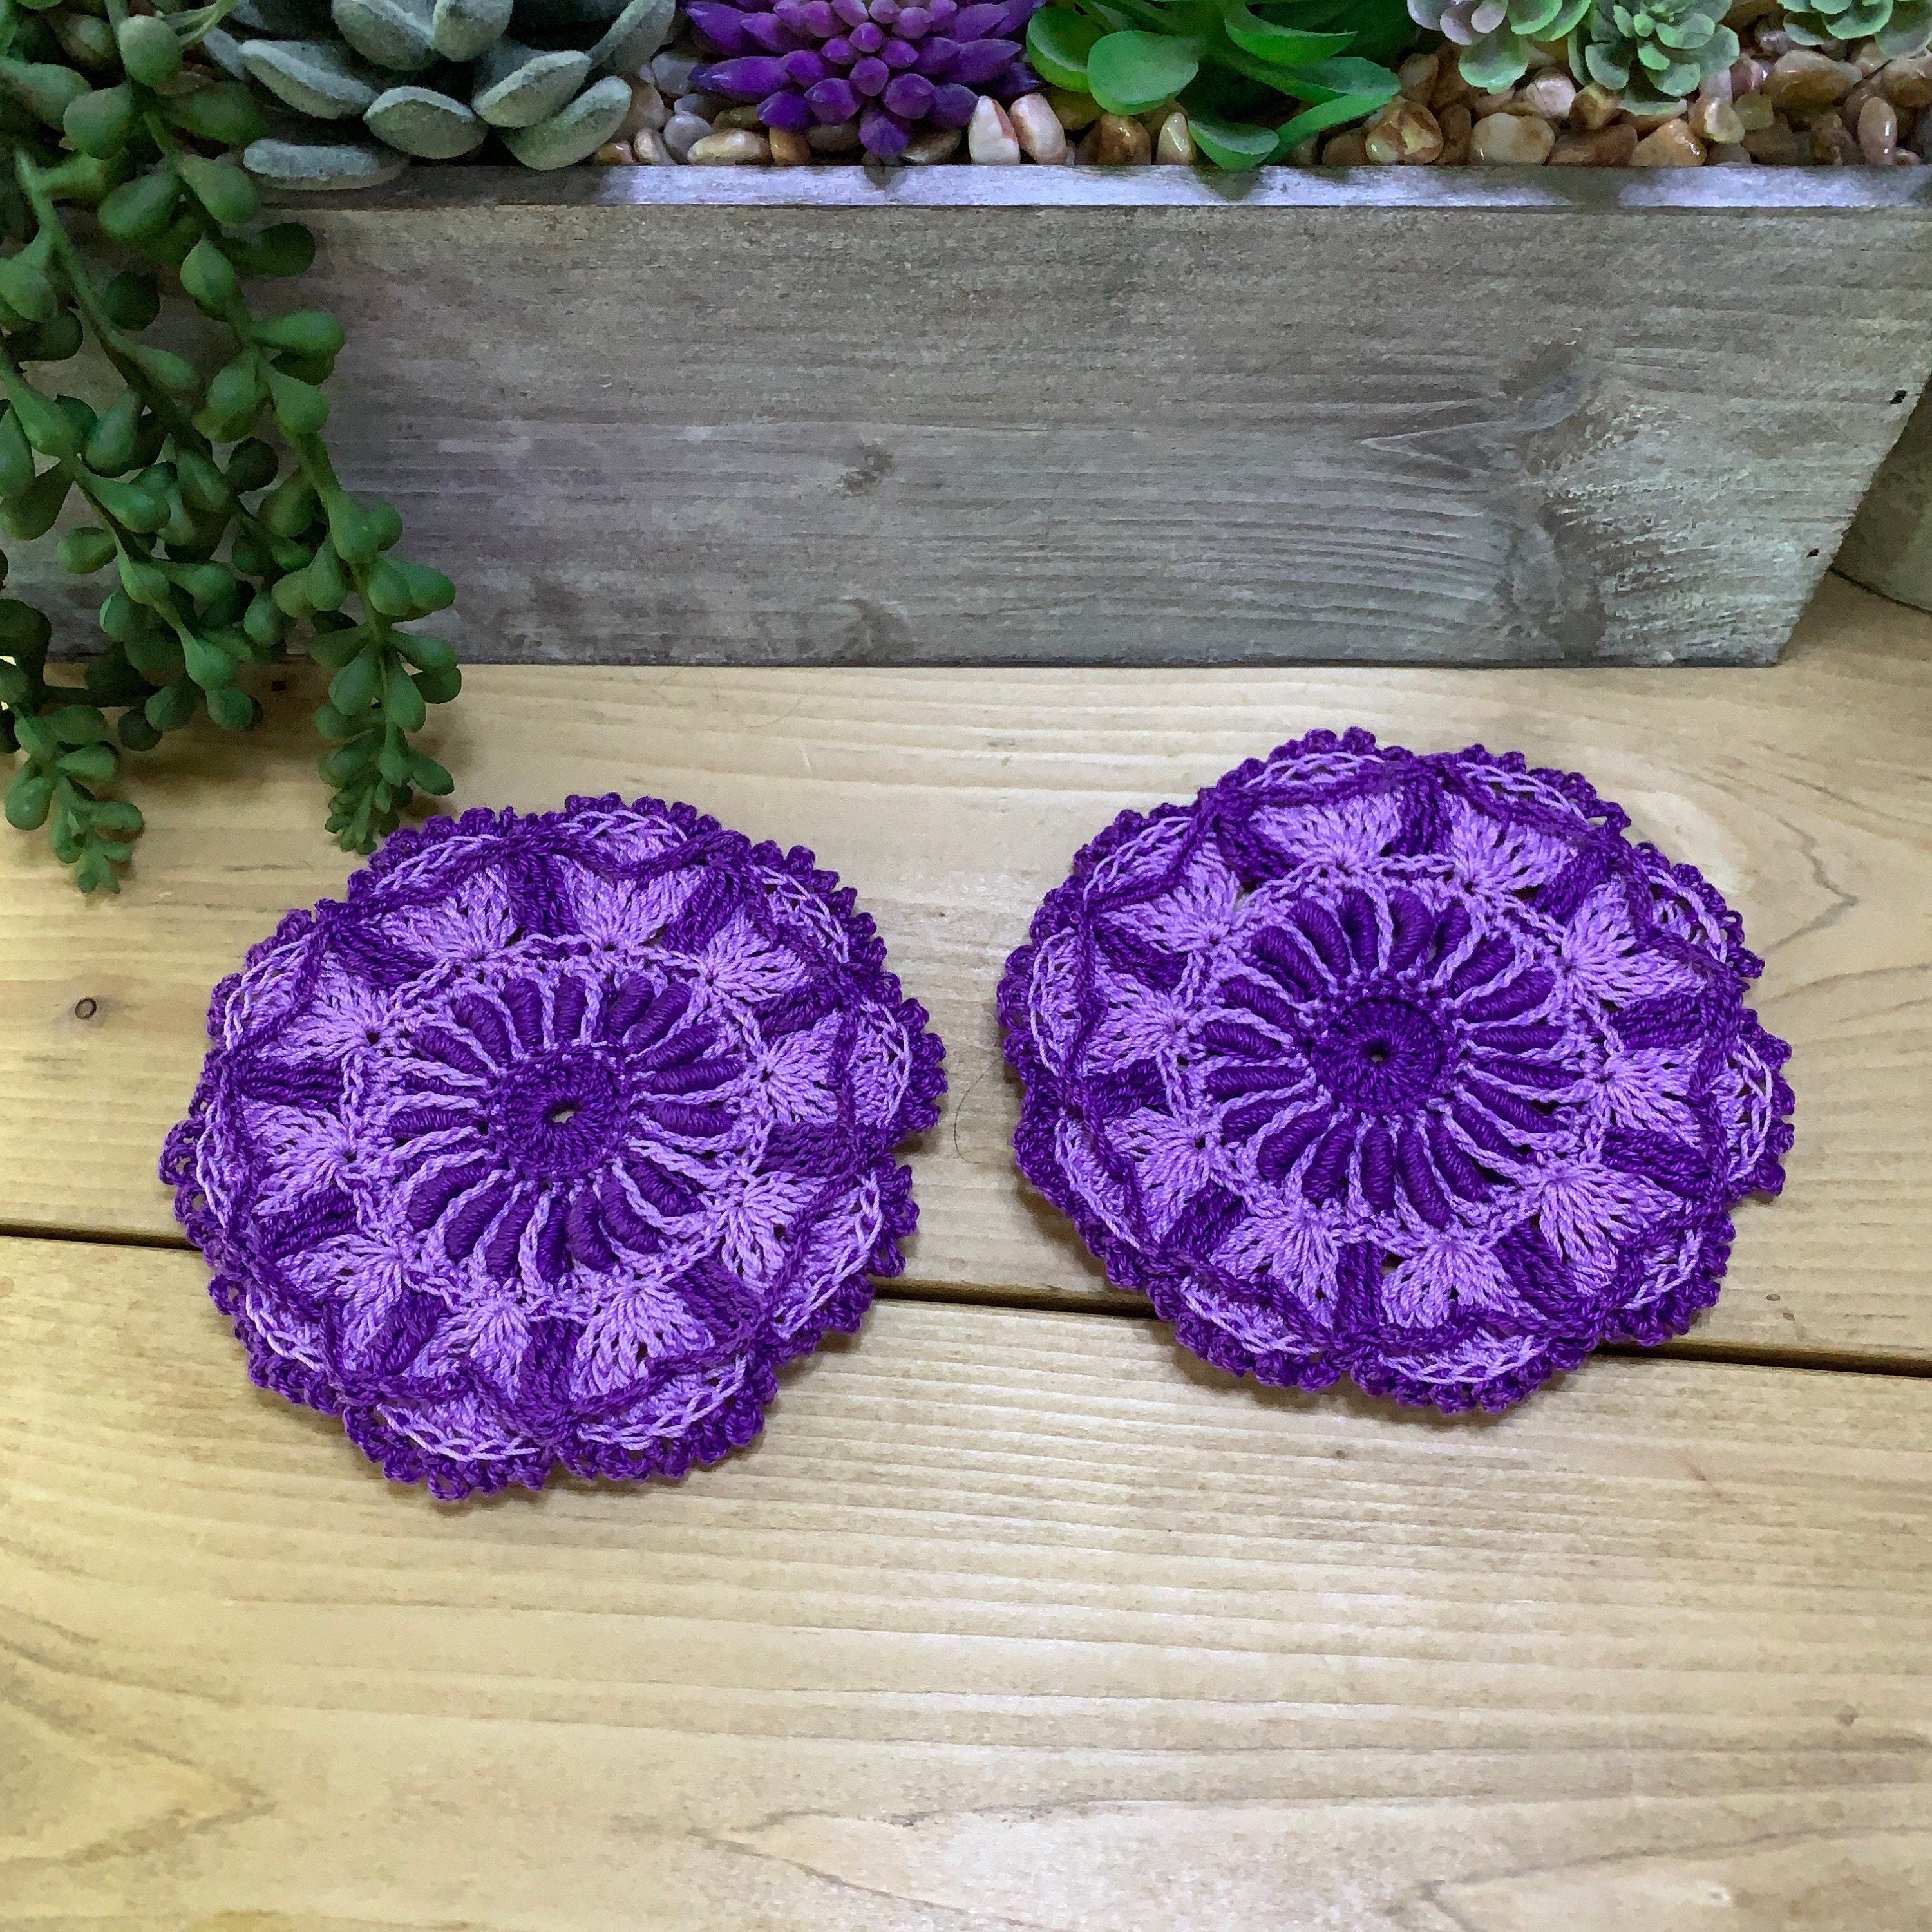 Set of two 4 inch Lilac / Purple Doily Coasters - Textured Mini Doilies